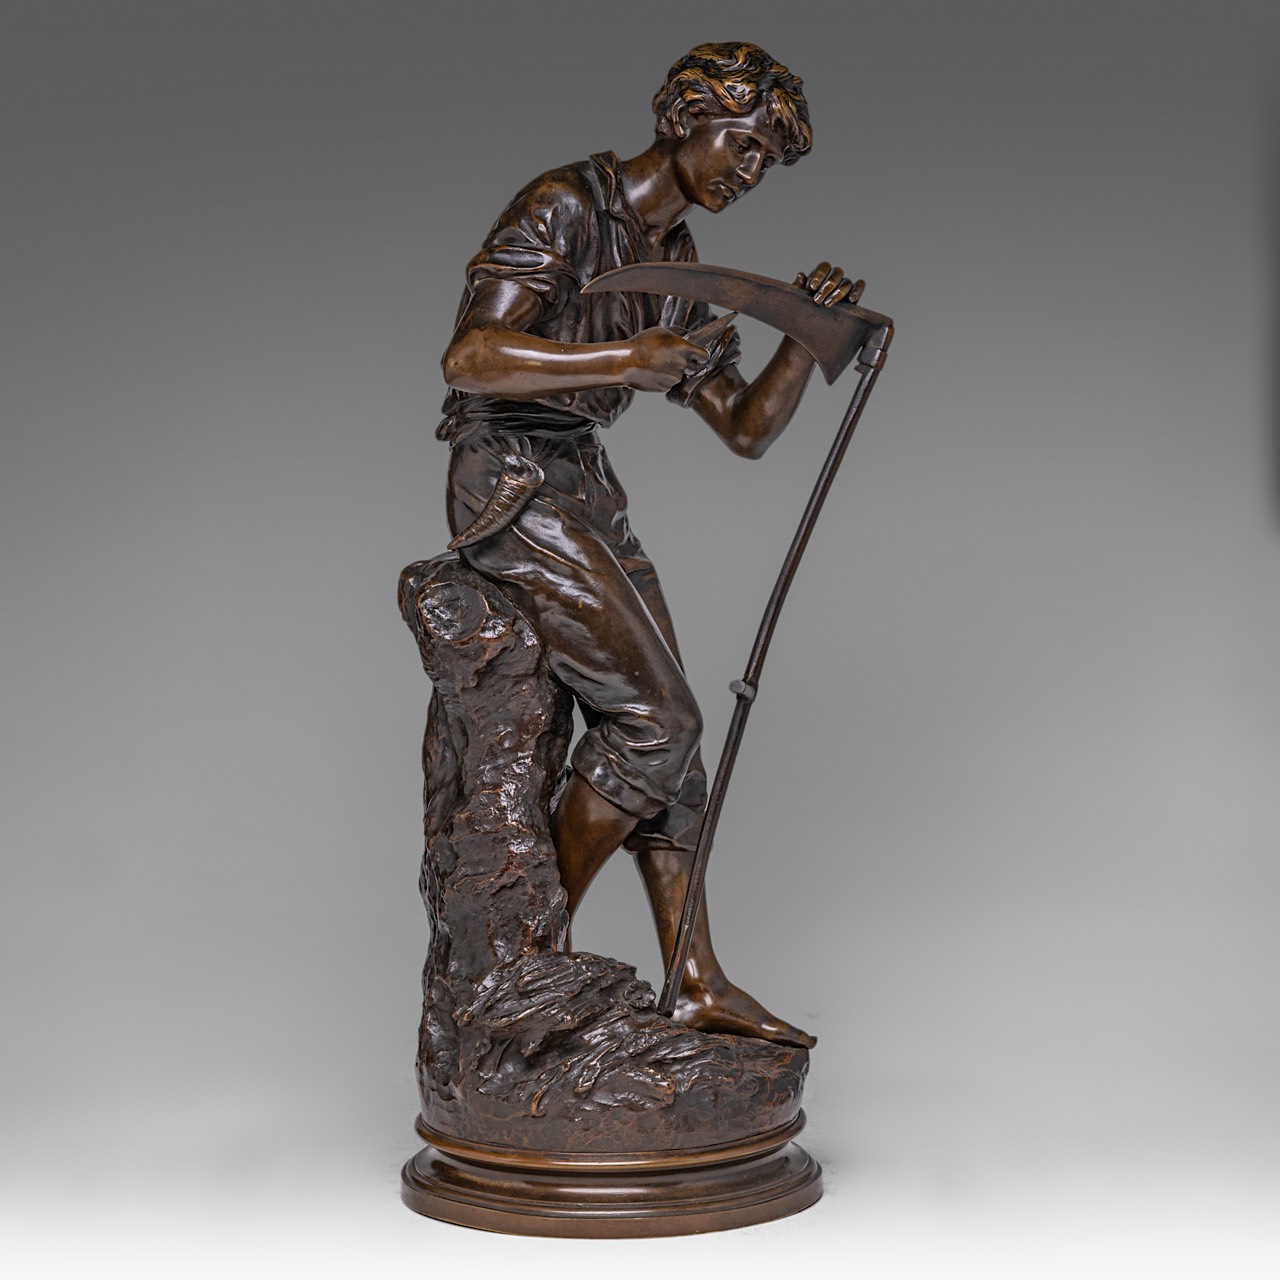 Mathurin Moreau (1822-1912), boy with scythe, patinated bronze, H 62 cm - Image 5 of 7